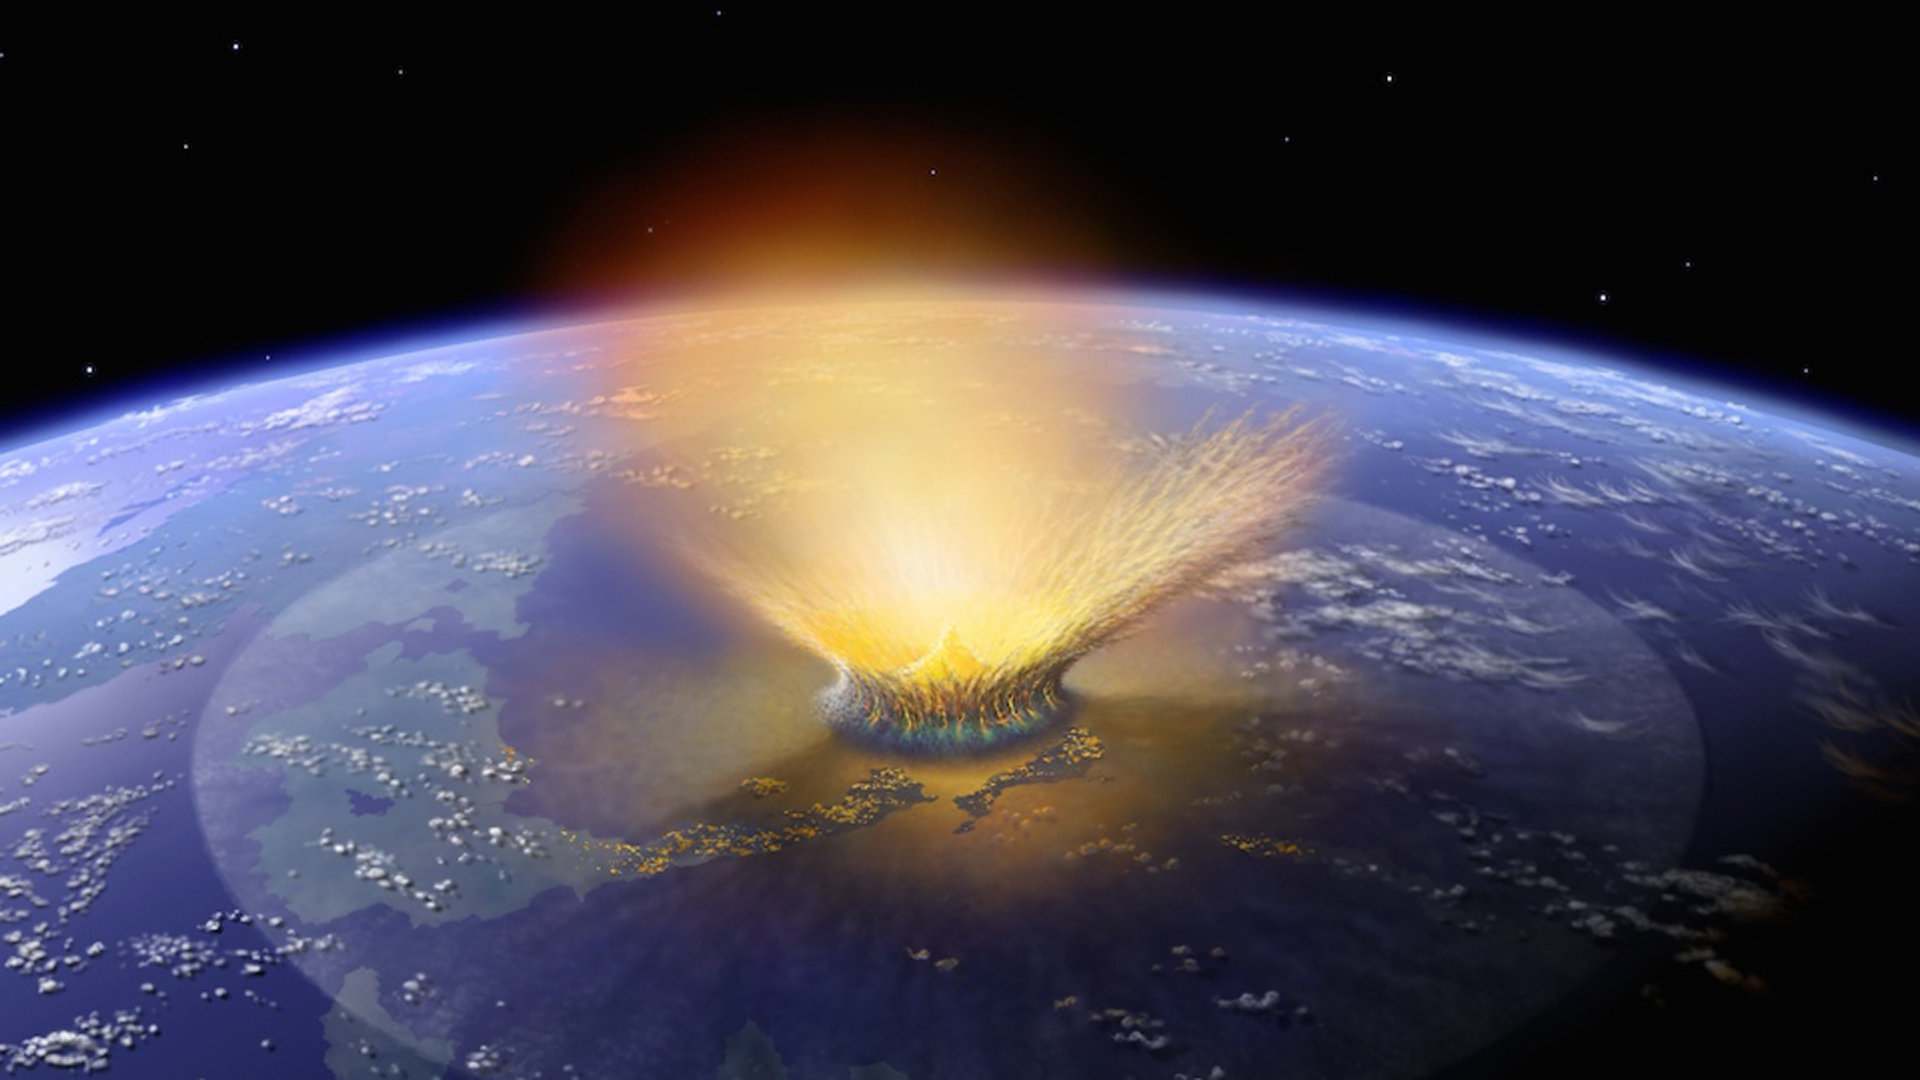 The meteorite impact occurred in the area where Mexico is today